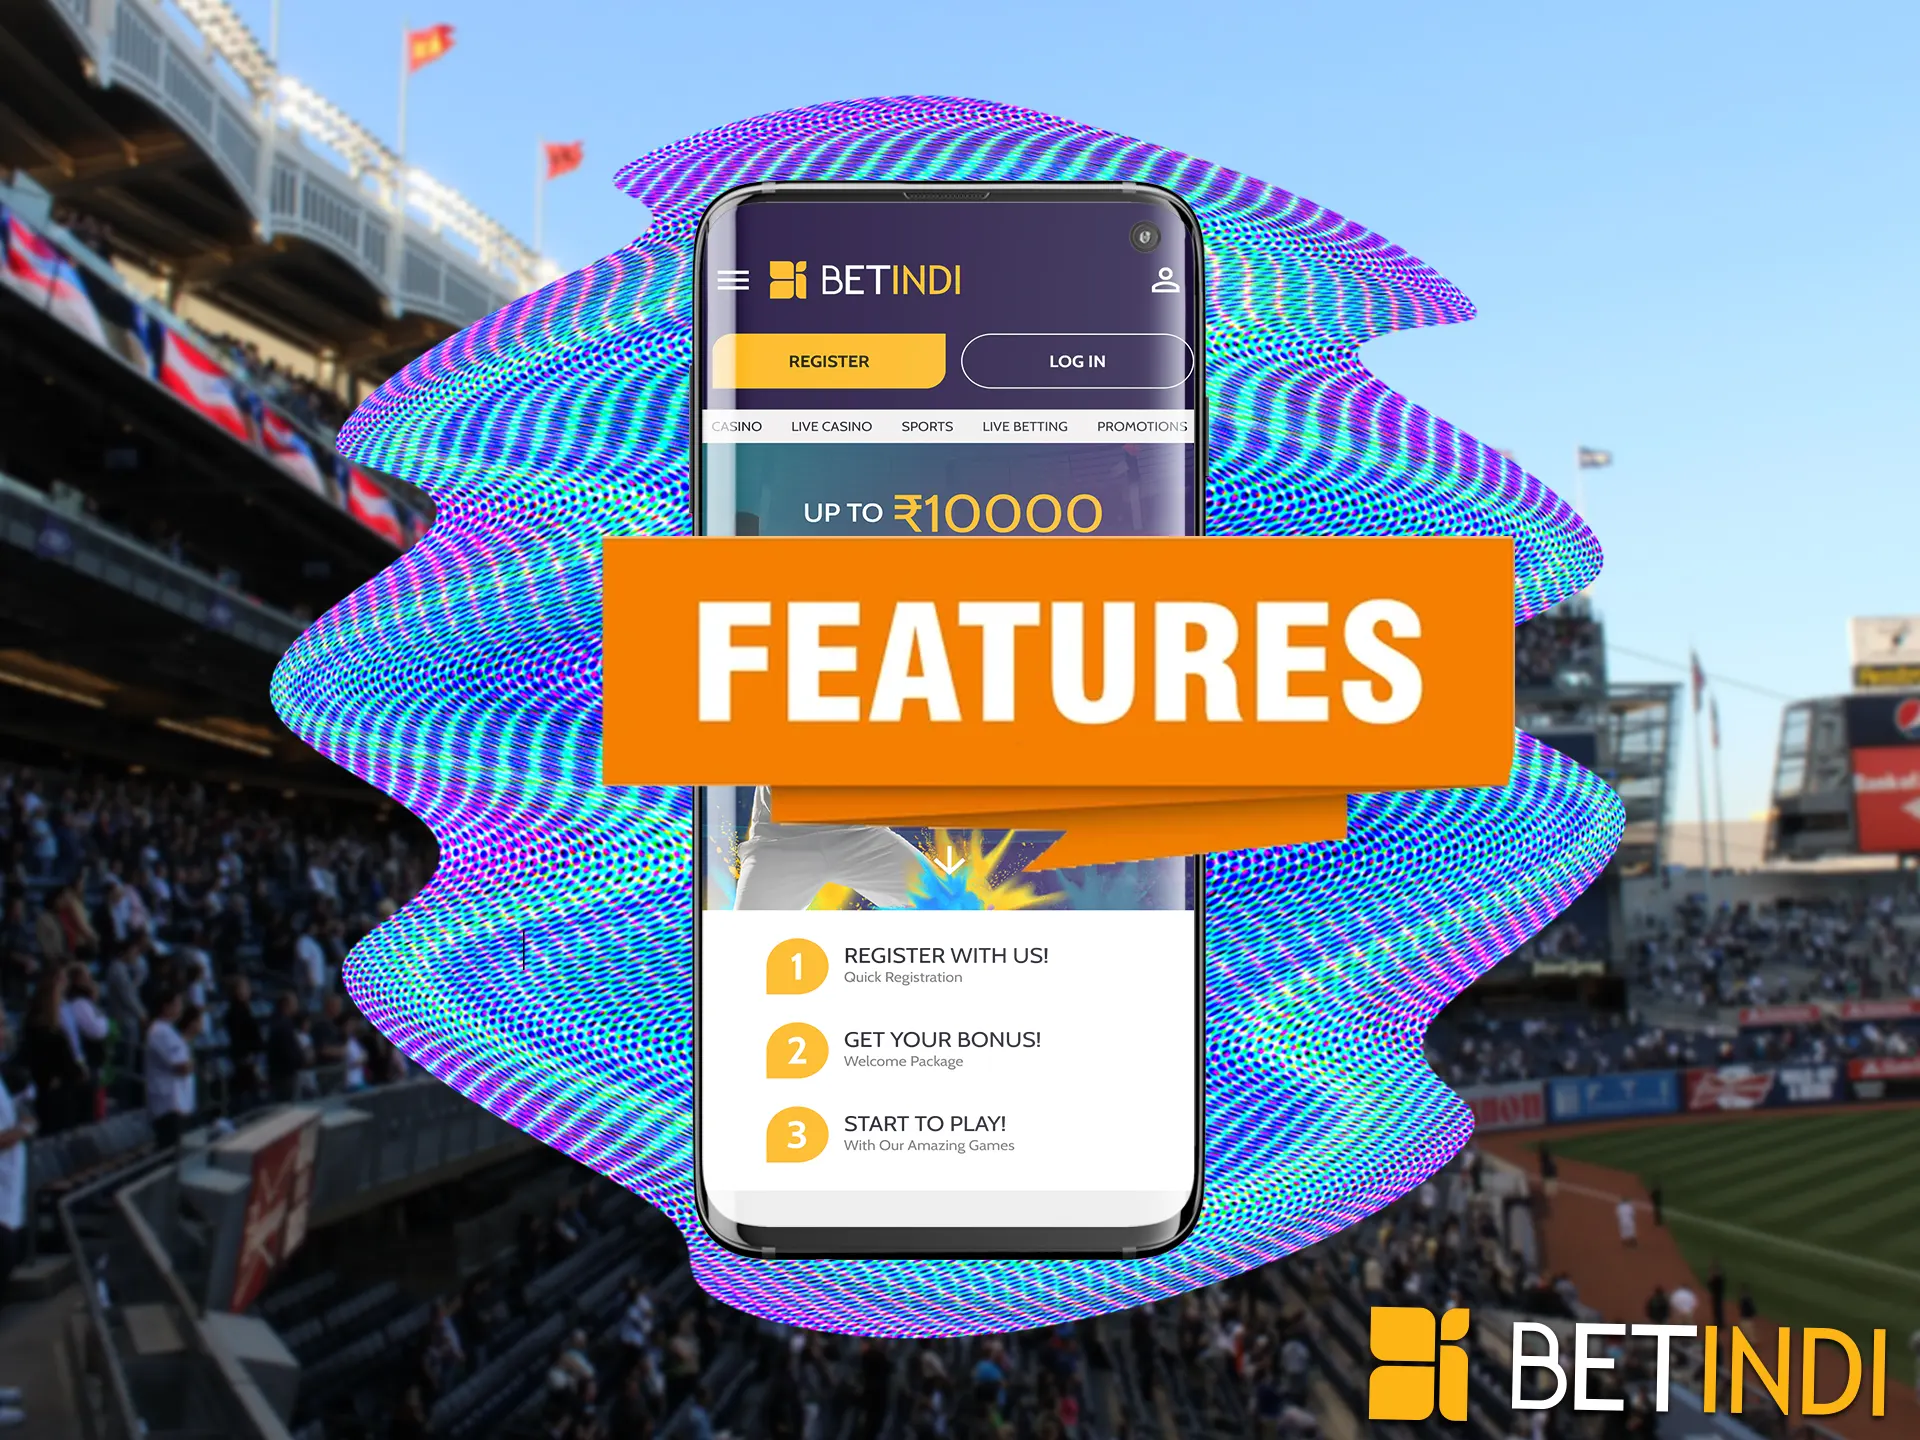 The BetIndi app has a wide range of functional advantages that make the game more comfortable.